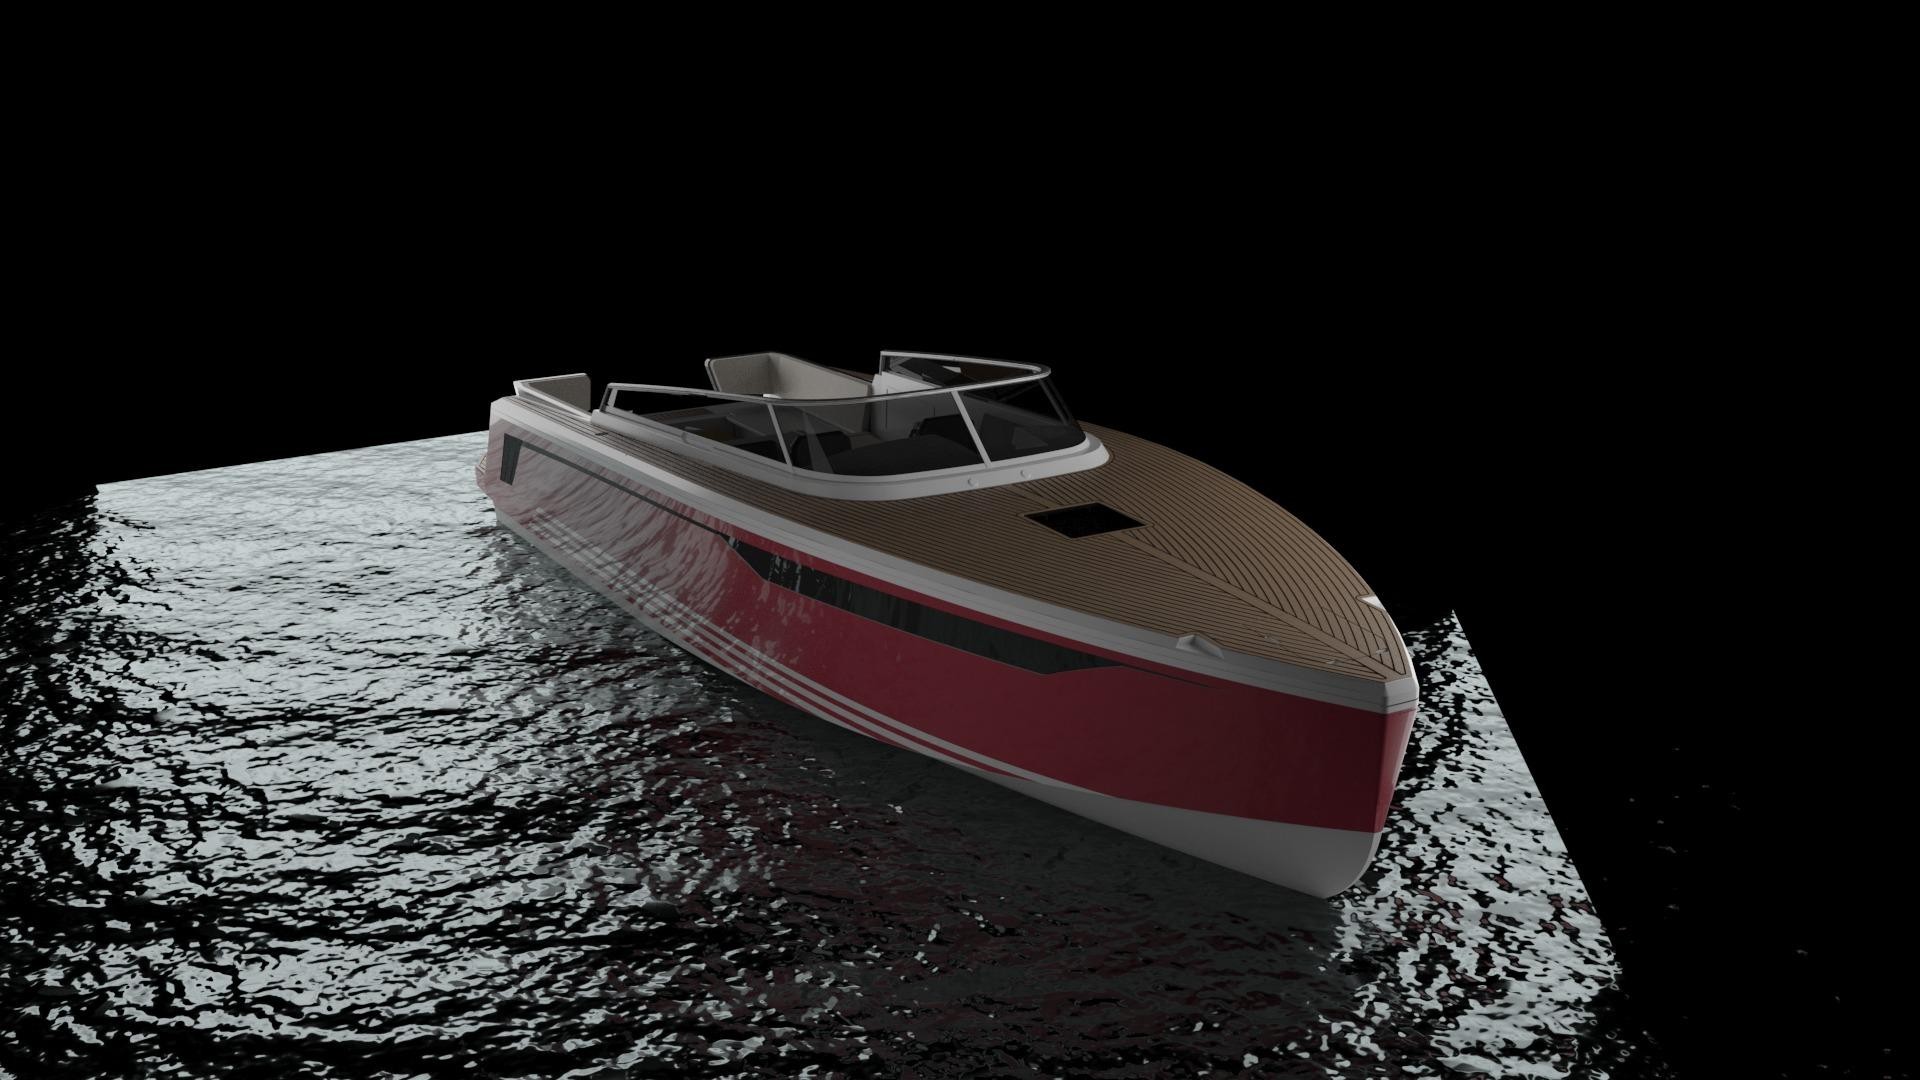  X-Yachts is introducing X-Power 33C - a powerful experience